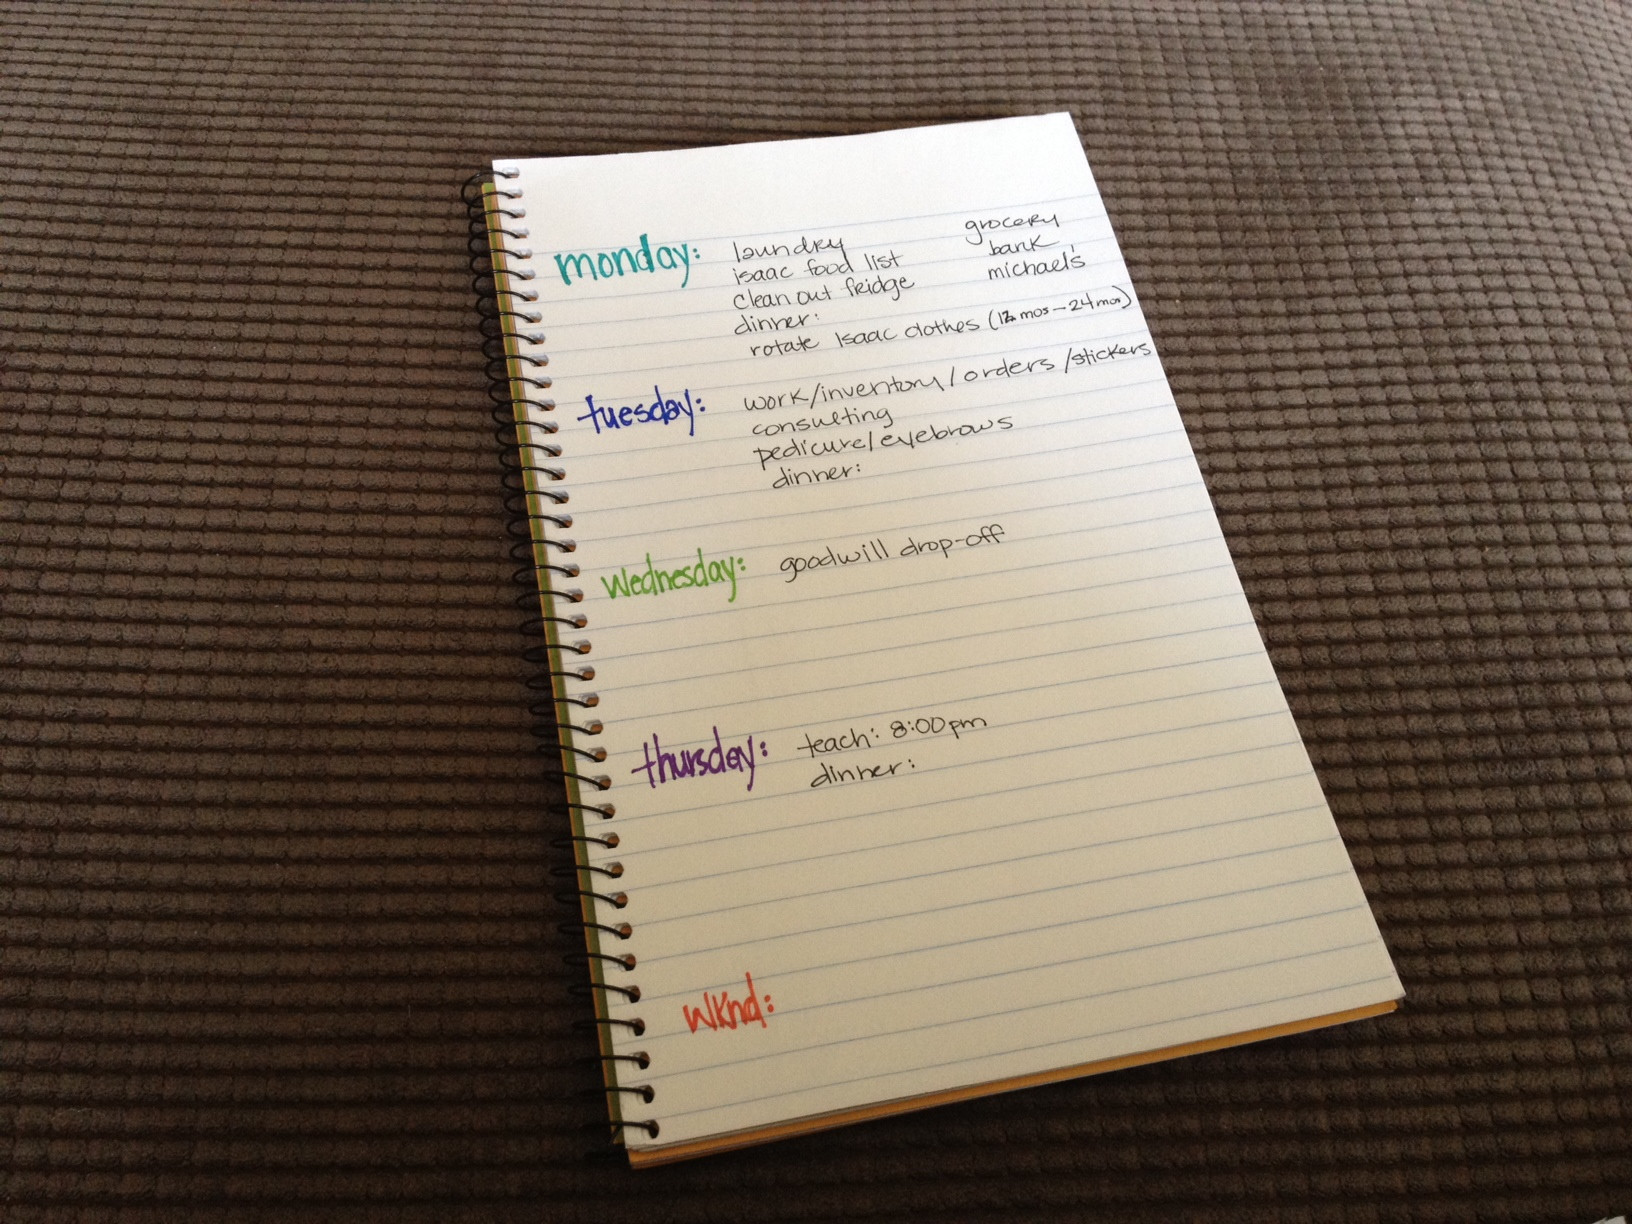 the-25-best-ideas-for-diy-planner-from-notebook-home-inspiration-and-ideas-diy-crafts